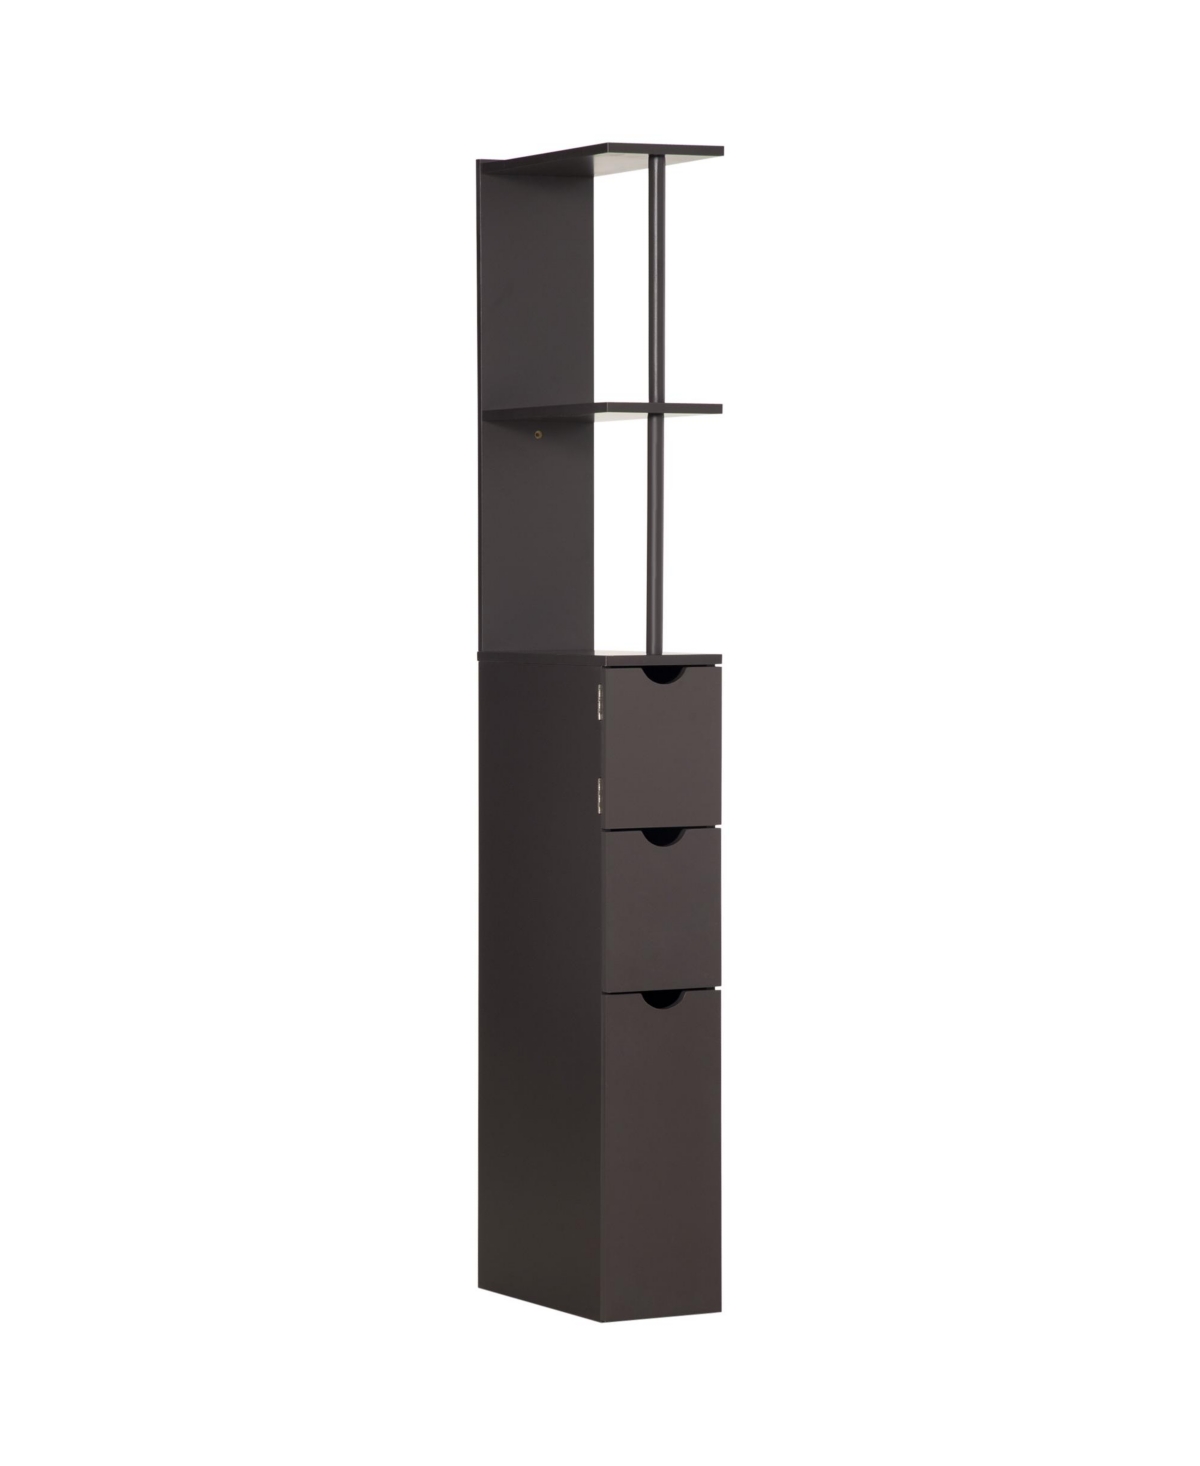 53.75" Tall Bathroom Storage Cabinet, Freestanding Linen Tower with 2-Tier Shelf and Drawers, Narrow Side Floor Organizer, Brown - Brown